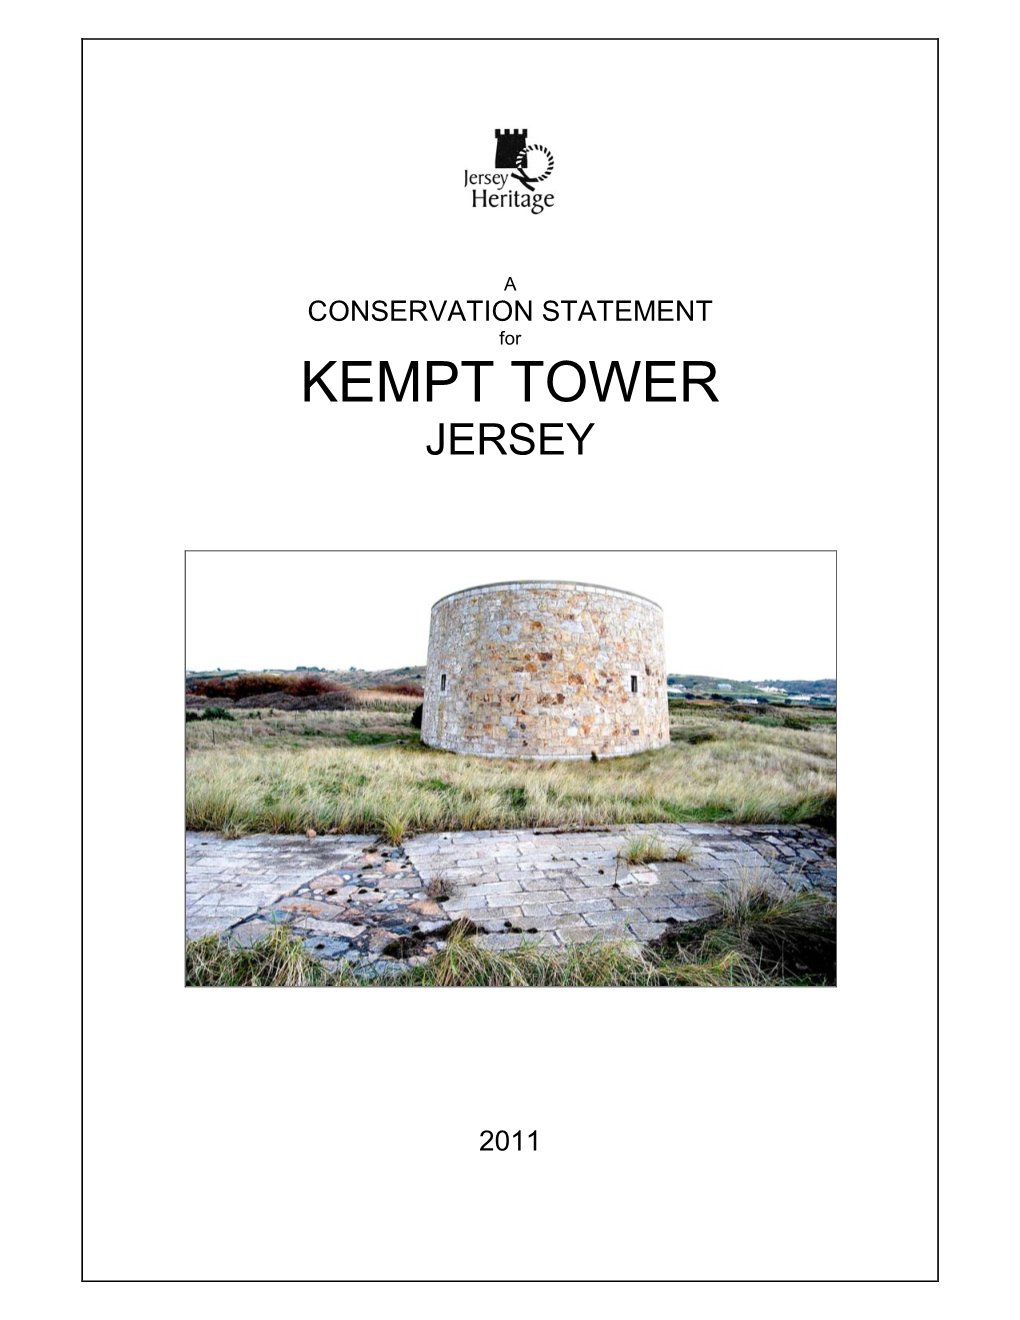 CONSERVATION STATEMENT for KEMPT TOWER